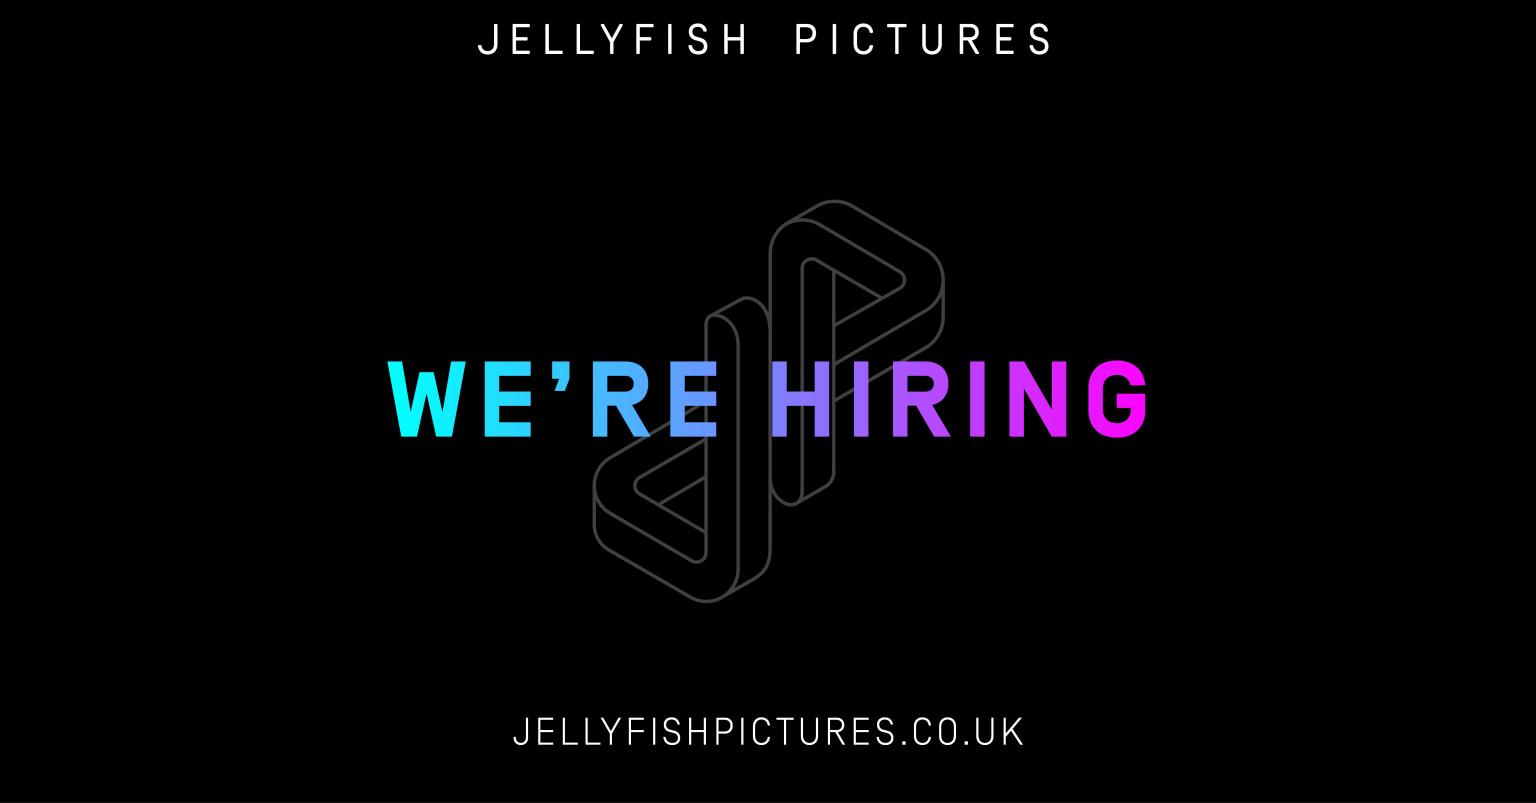 Jellyfish Pictures is now hiring for 3D Character Animators